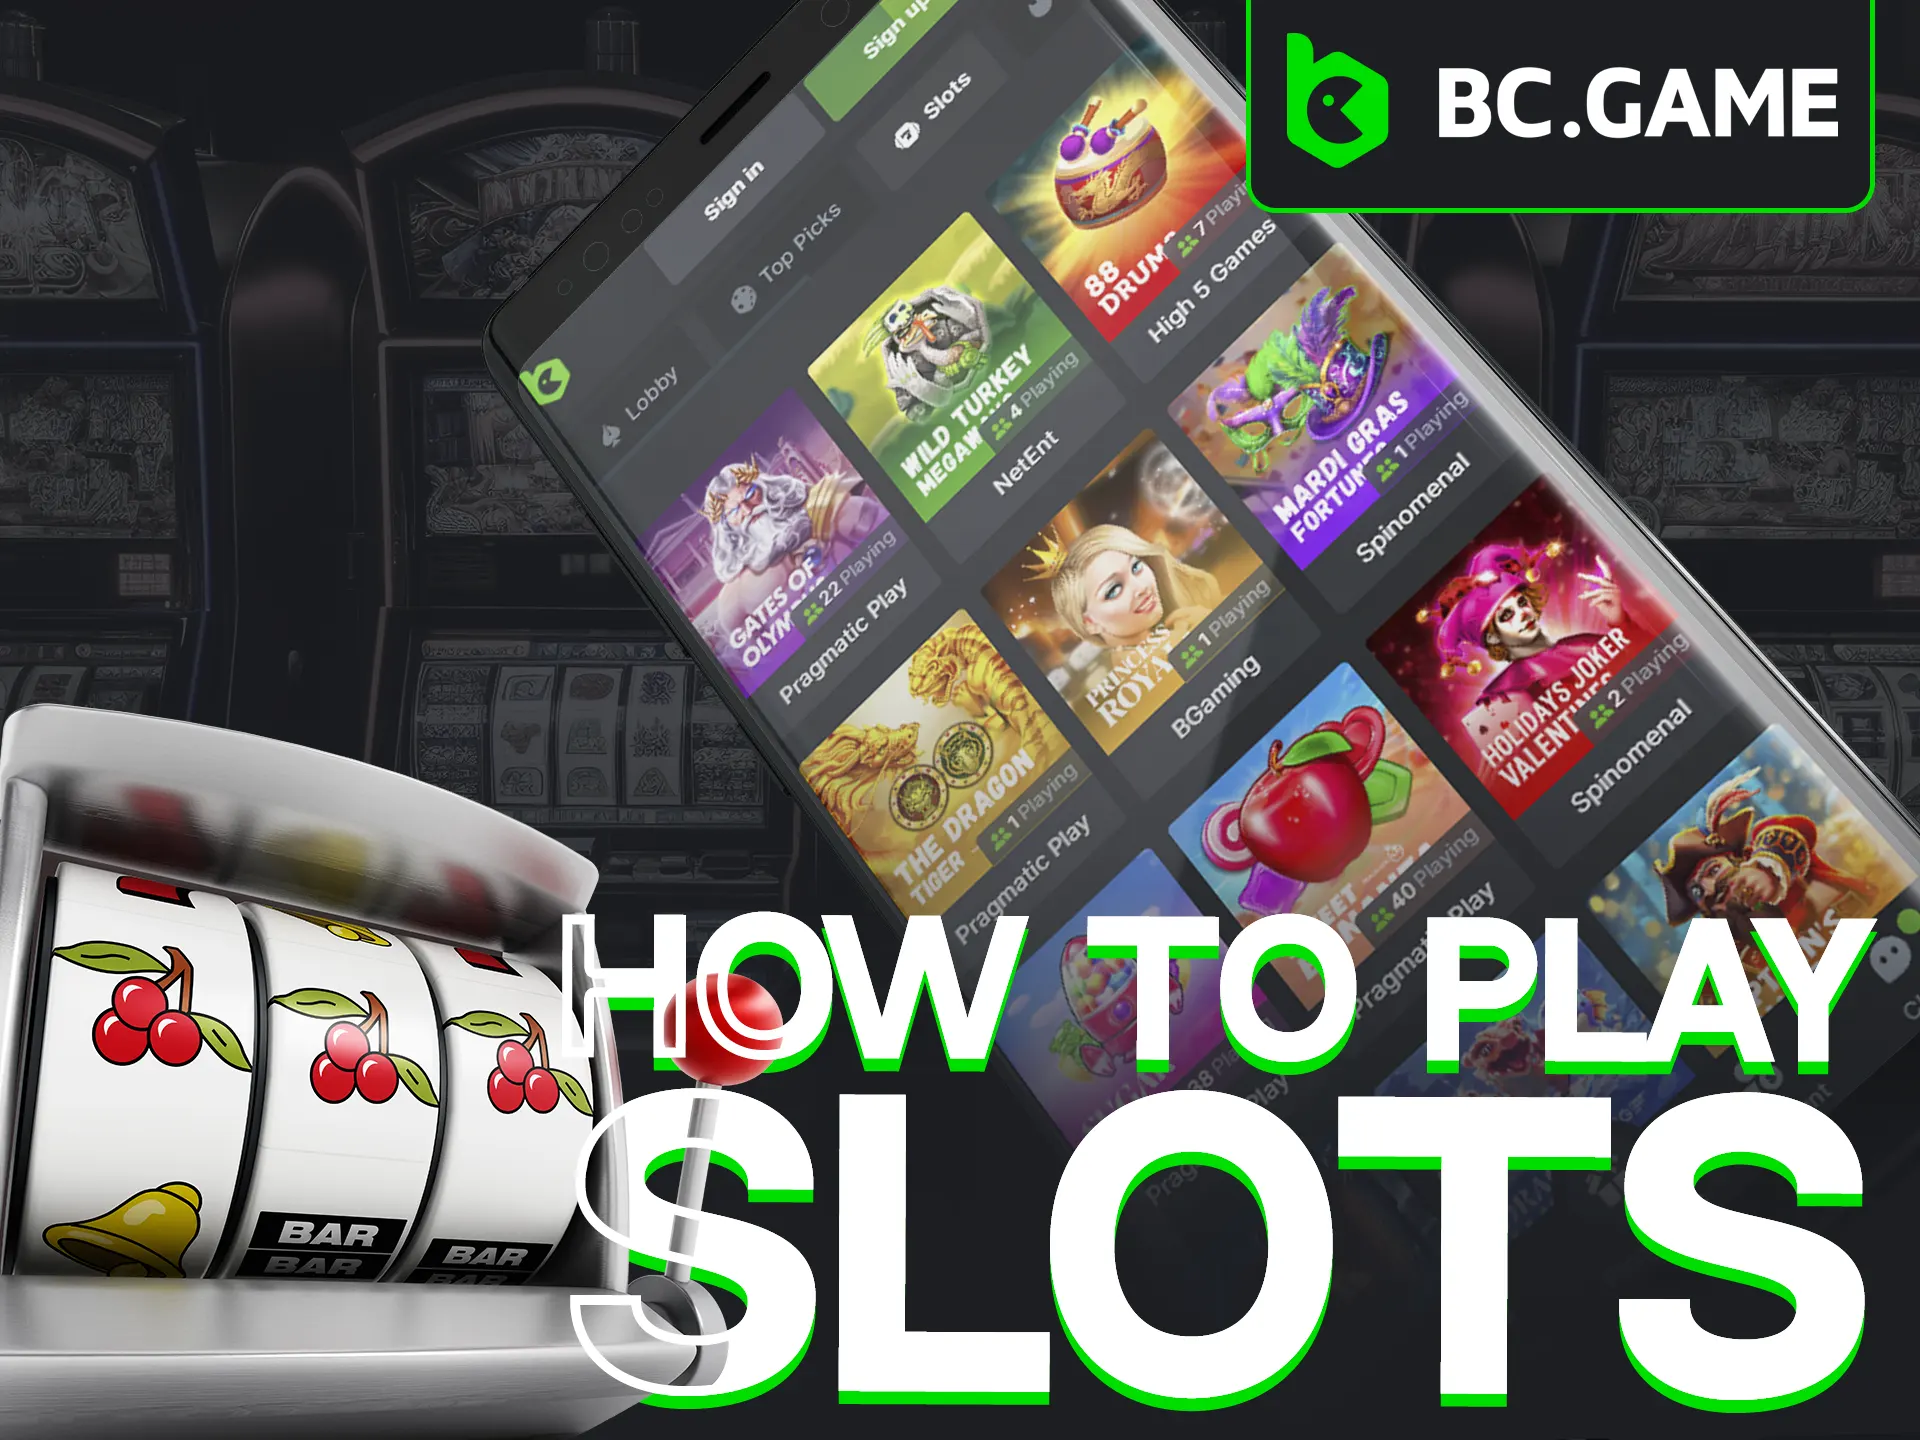 Start playing slots on BC Game App quickly with these steps.